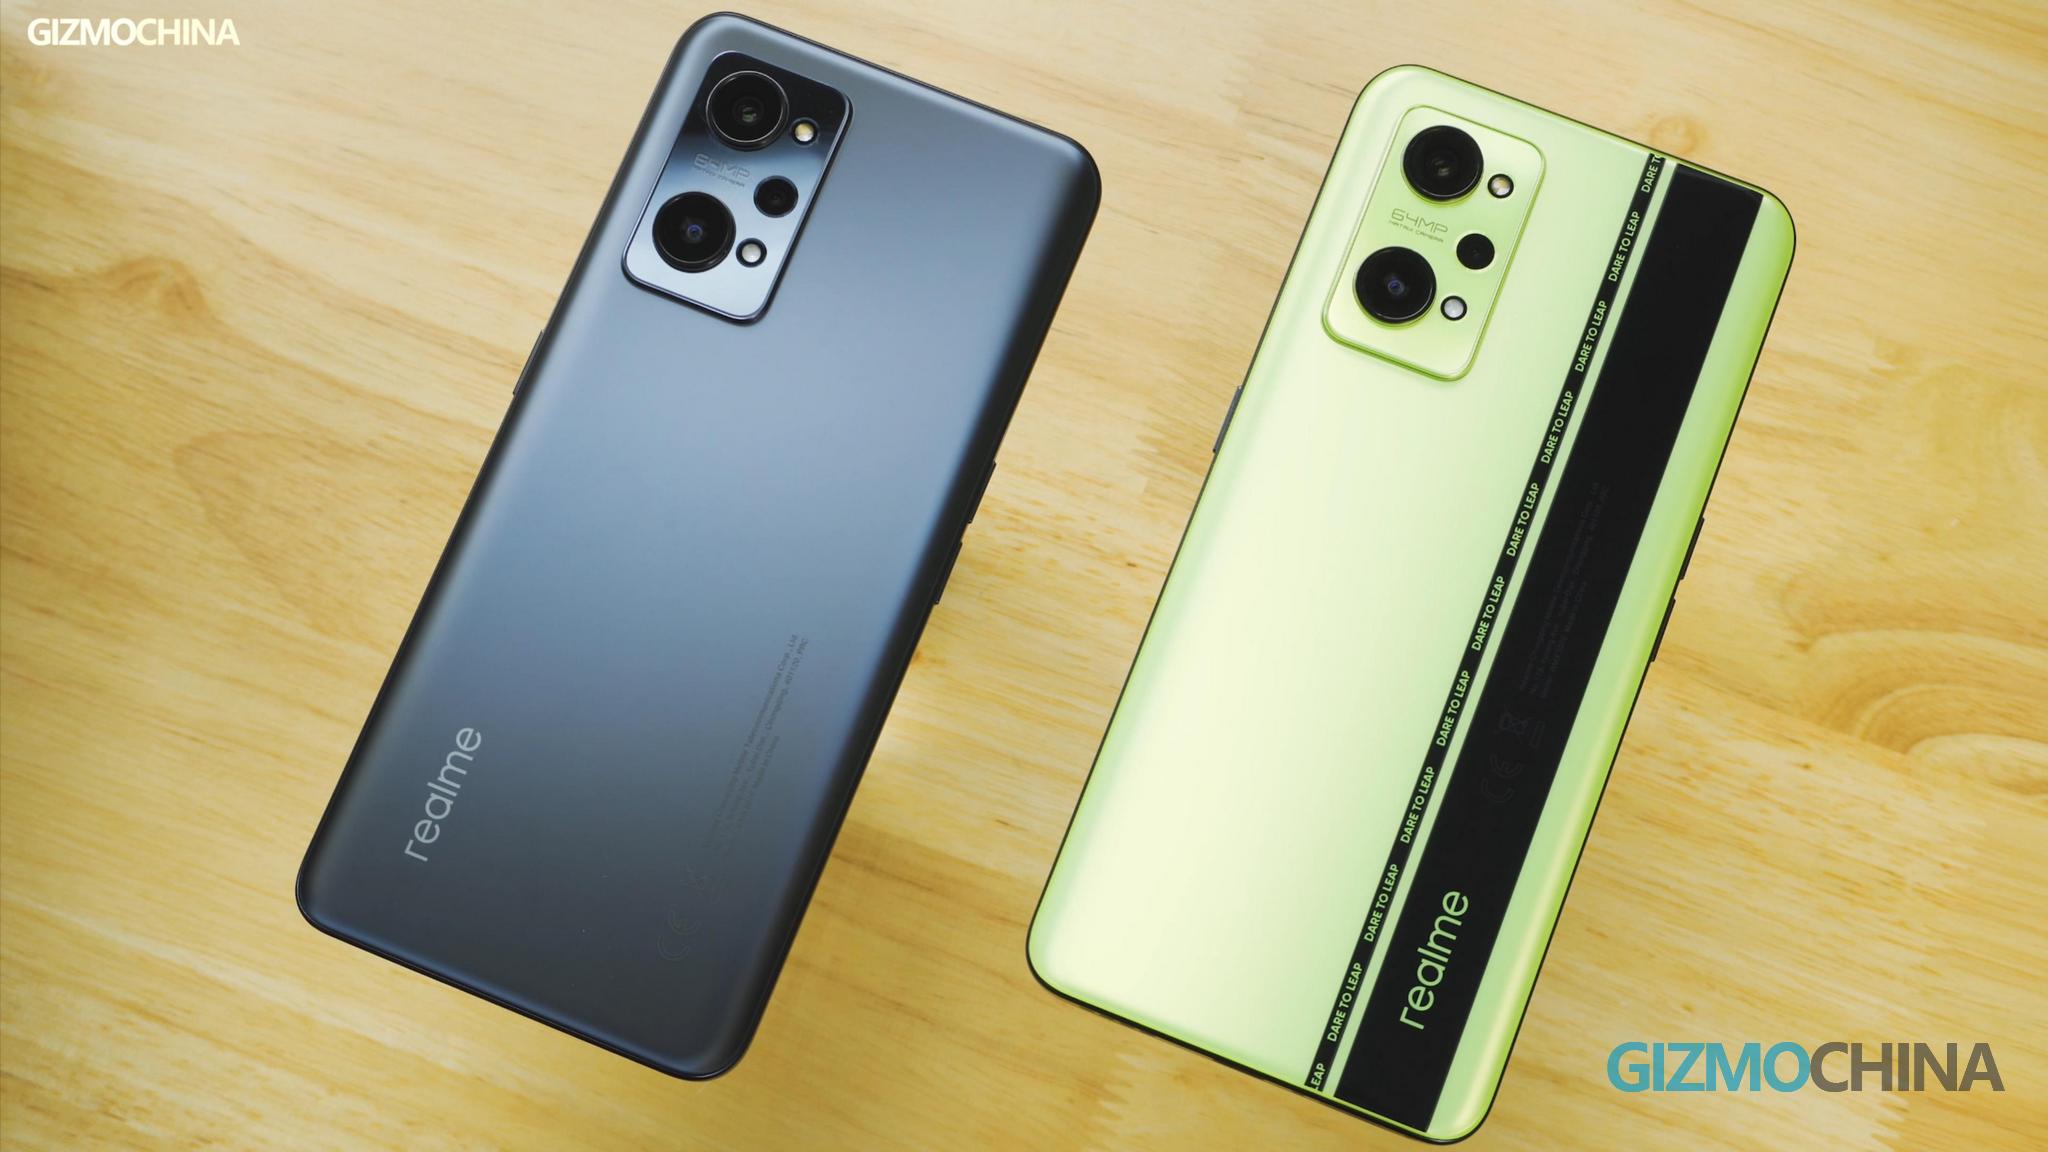 Realme GT Neo 2 quick review: Gamers are going to love it